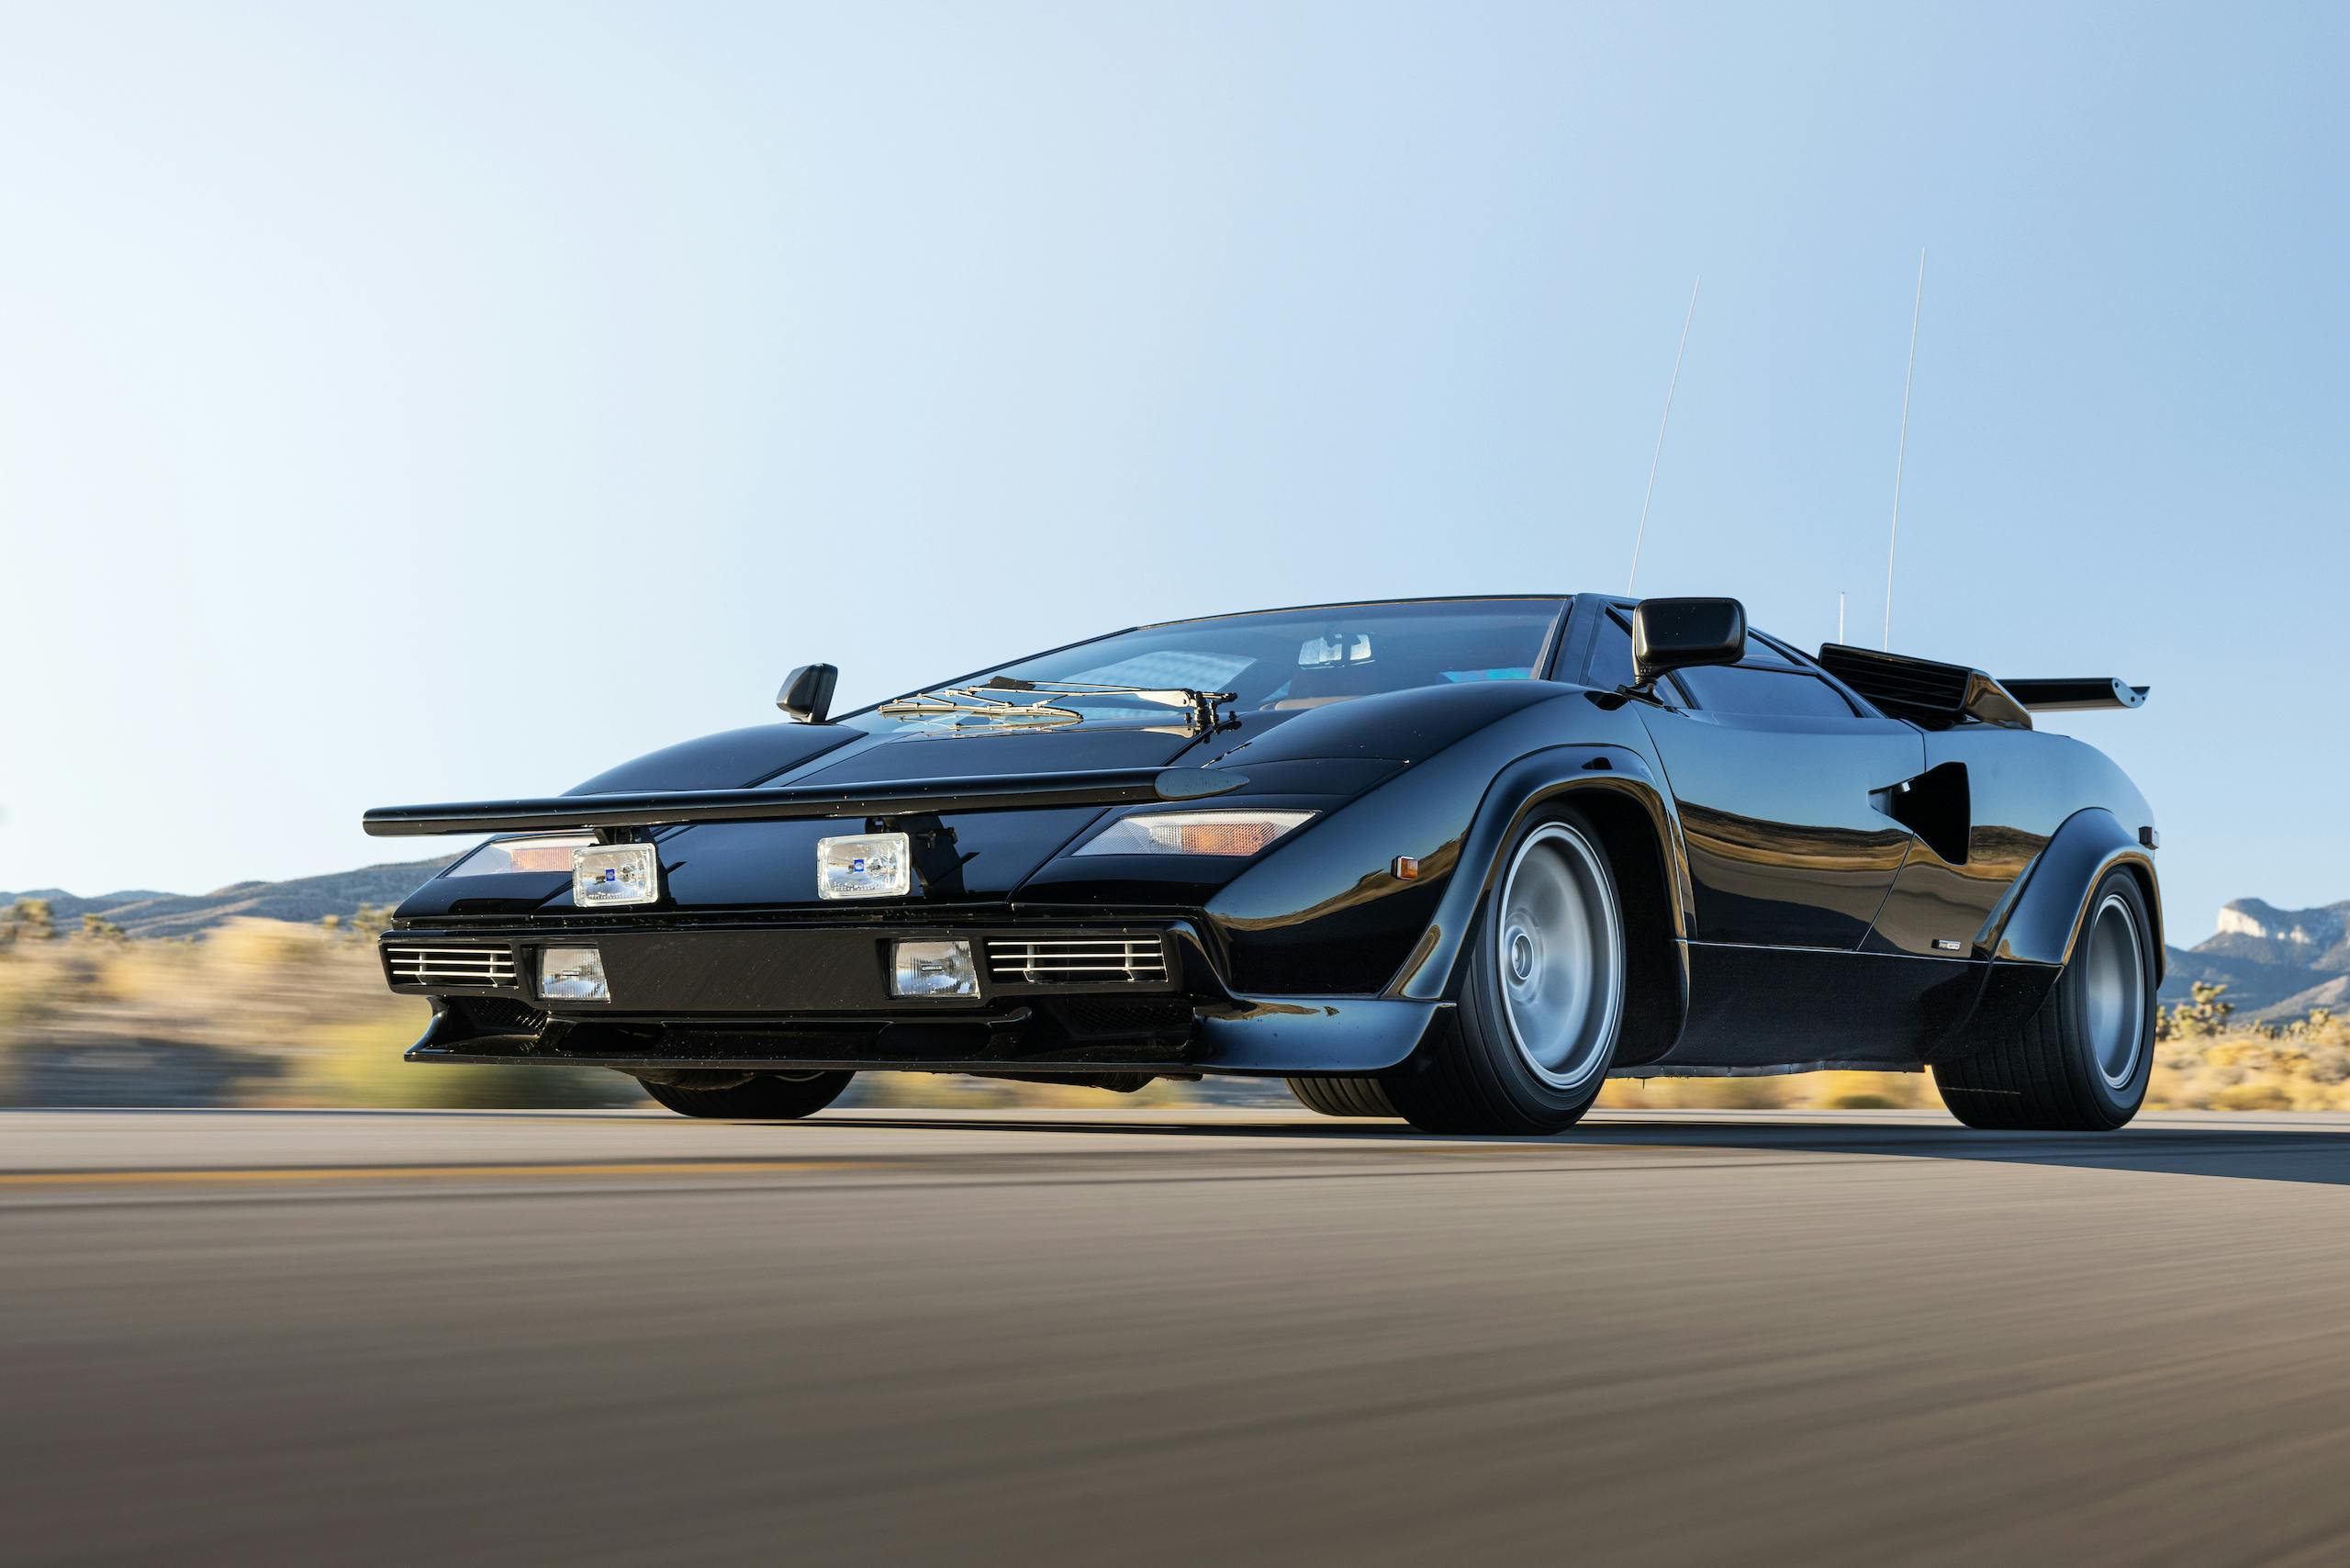 Cannonball Run Countach roars back into the spotlight, just as it